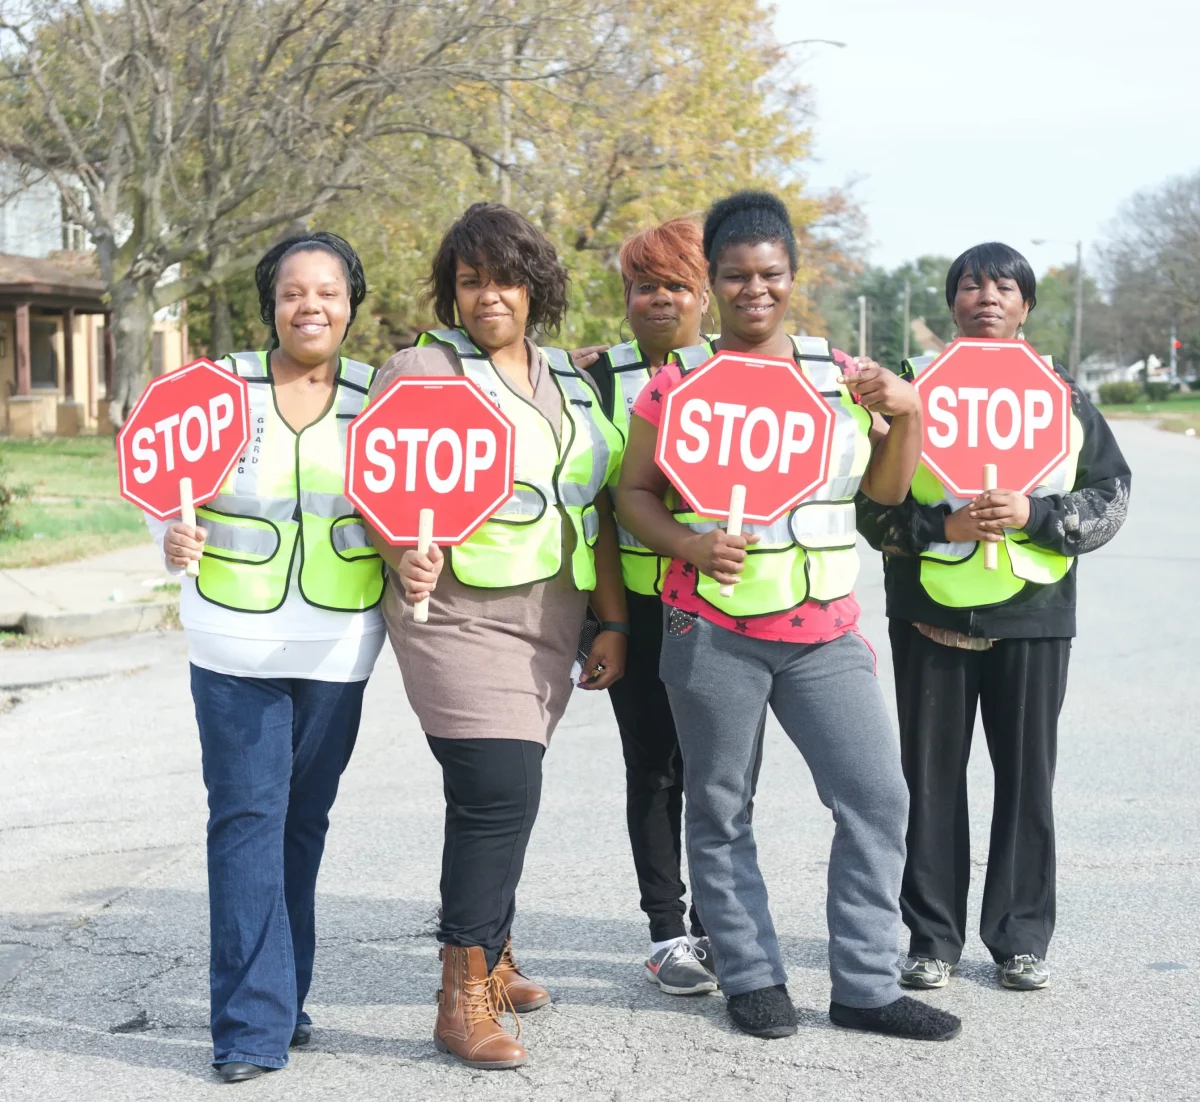 Five women wearing safety vests and holding paper stop signs stand in the middle of the street